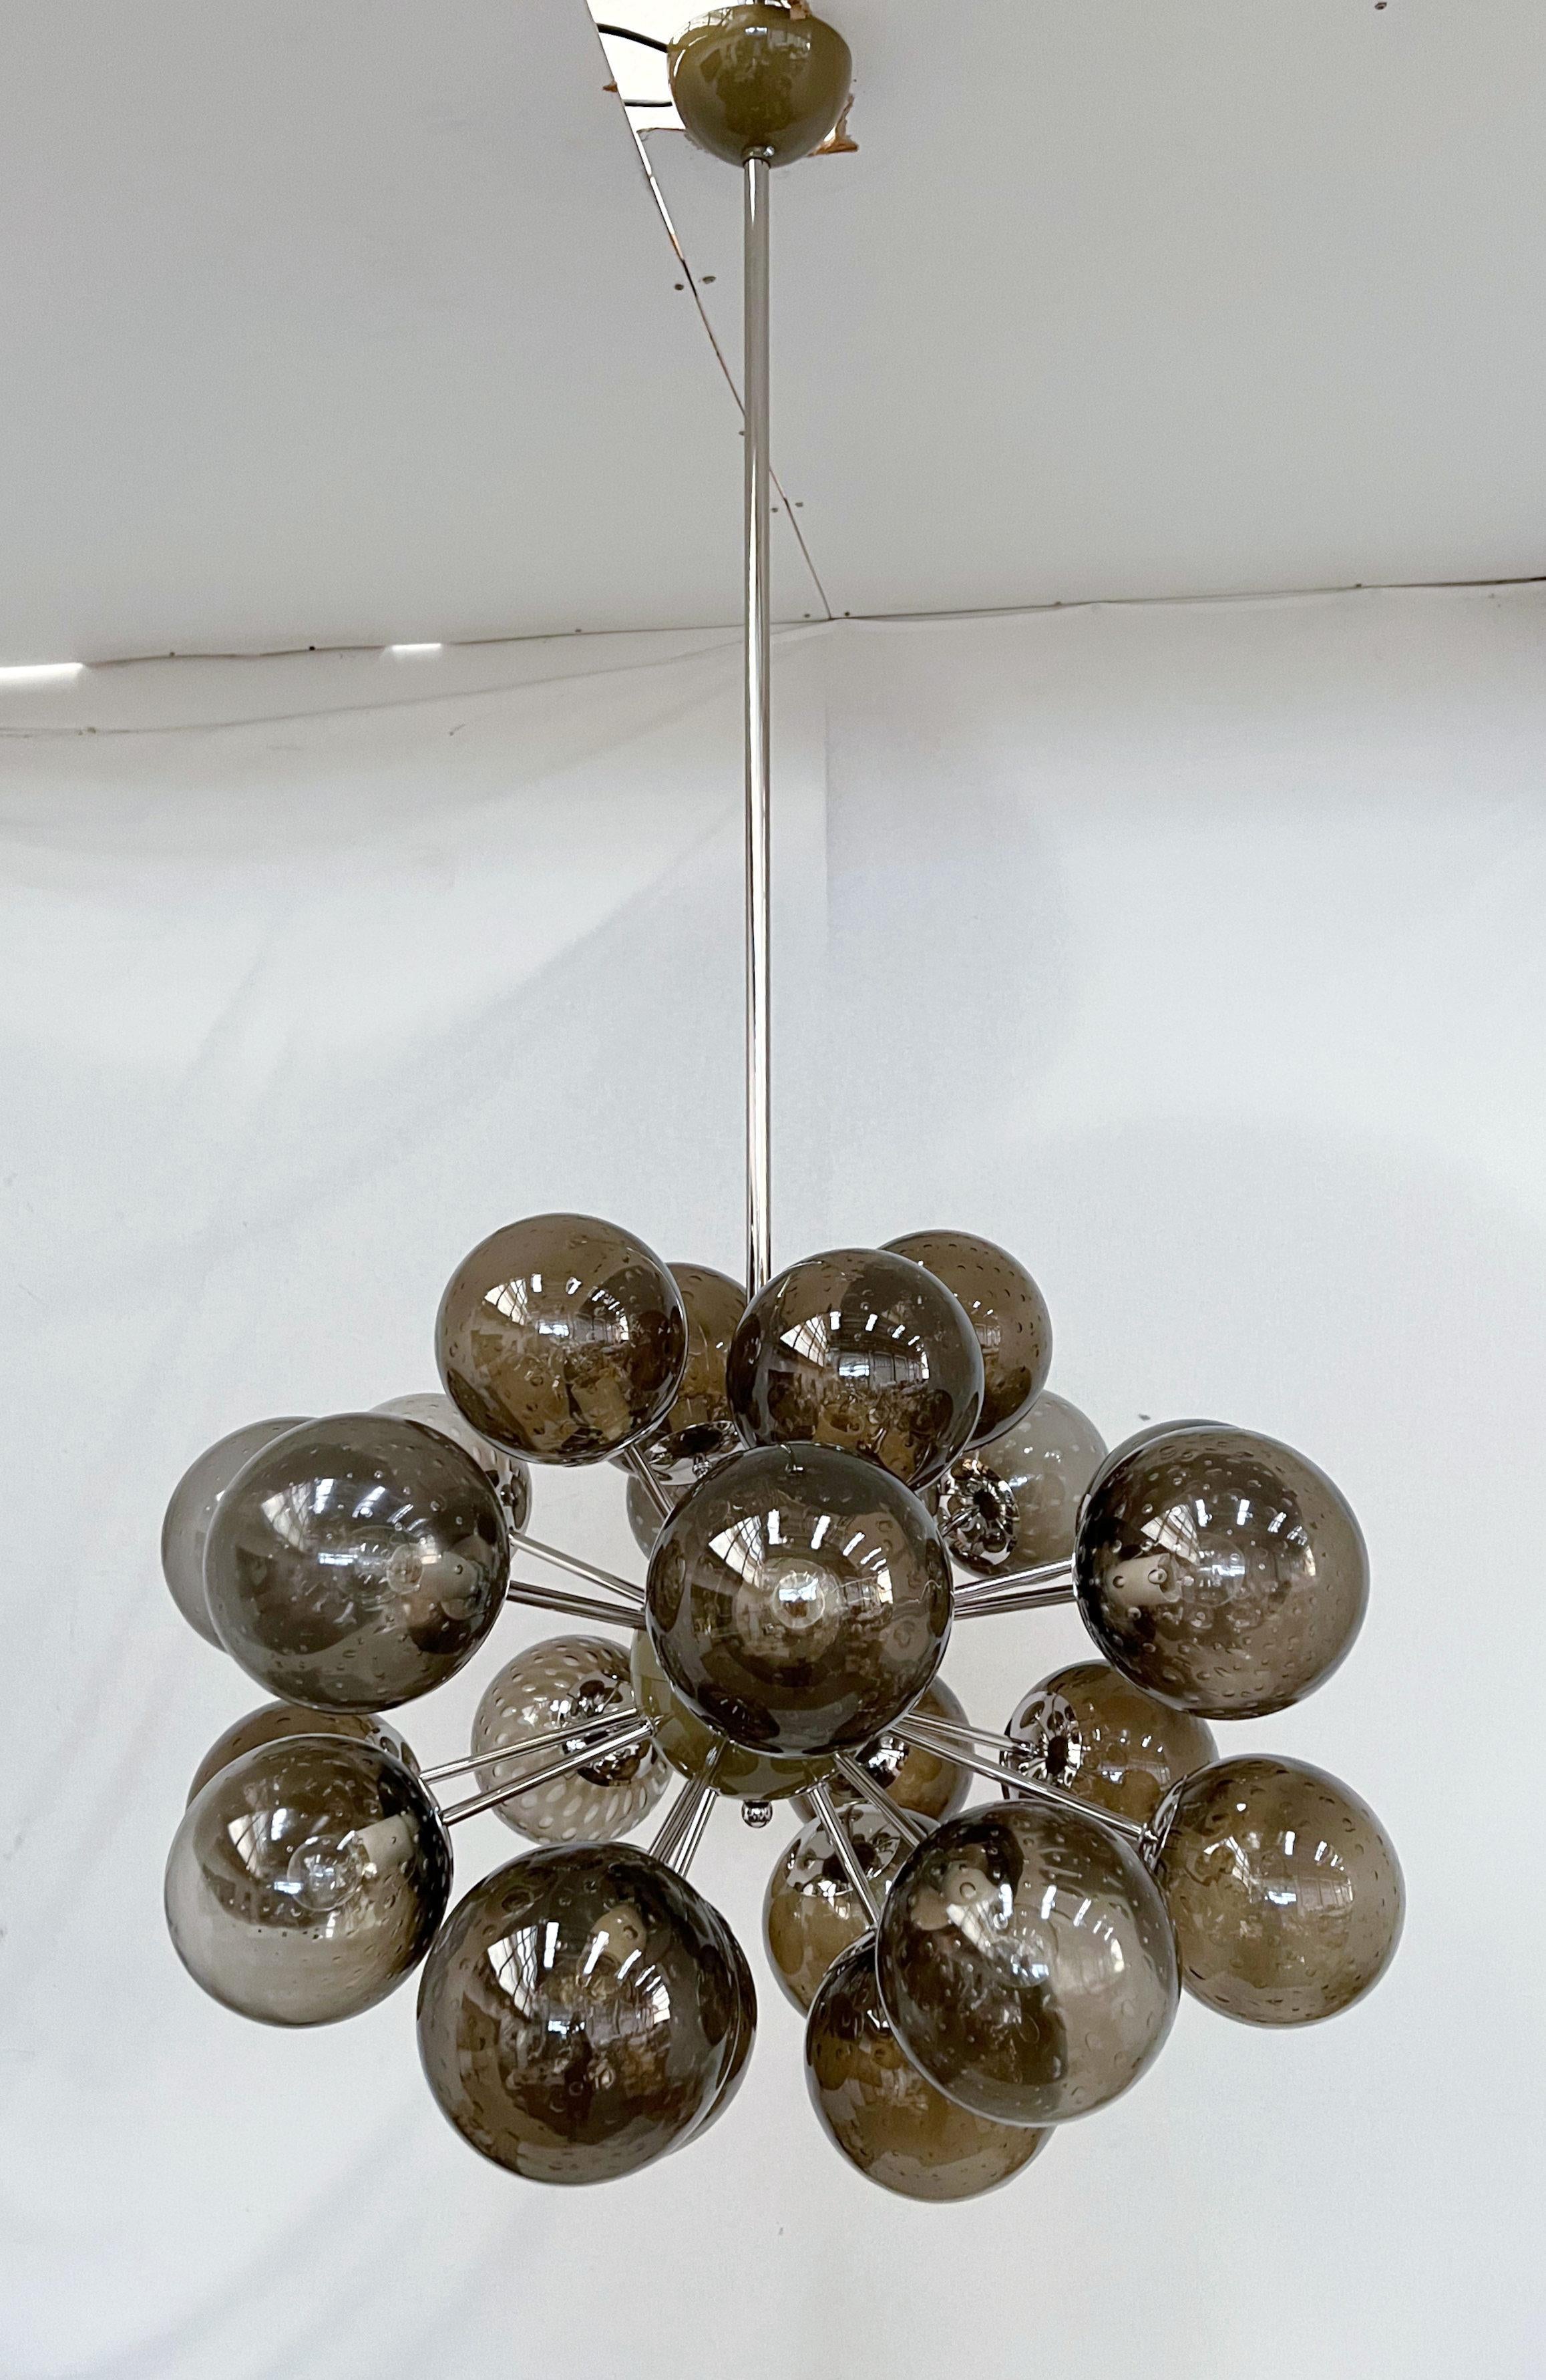 Italian oval shaped sputnik chandelier with Murano glass globes mounted on metal frame in polished nickel finish / Designed by Fabio Bergomi for Fabio Ltd / Made in Italy
24 lights / E12 or E14 type / max 40W each
Diameter: 36 inches / Total